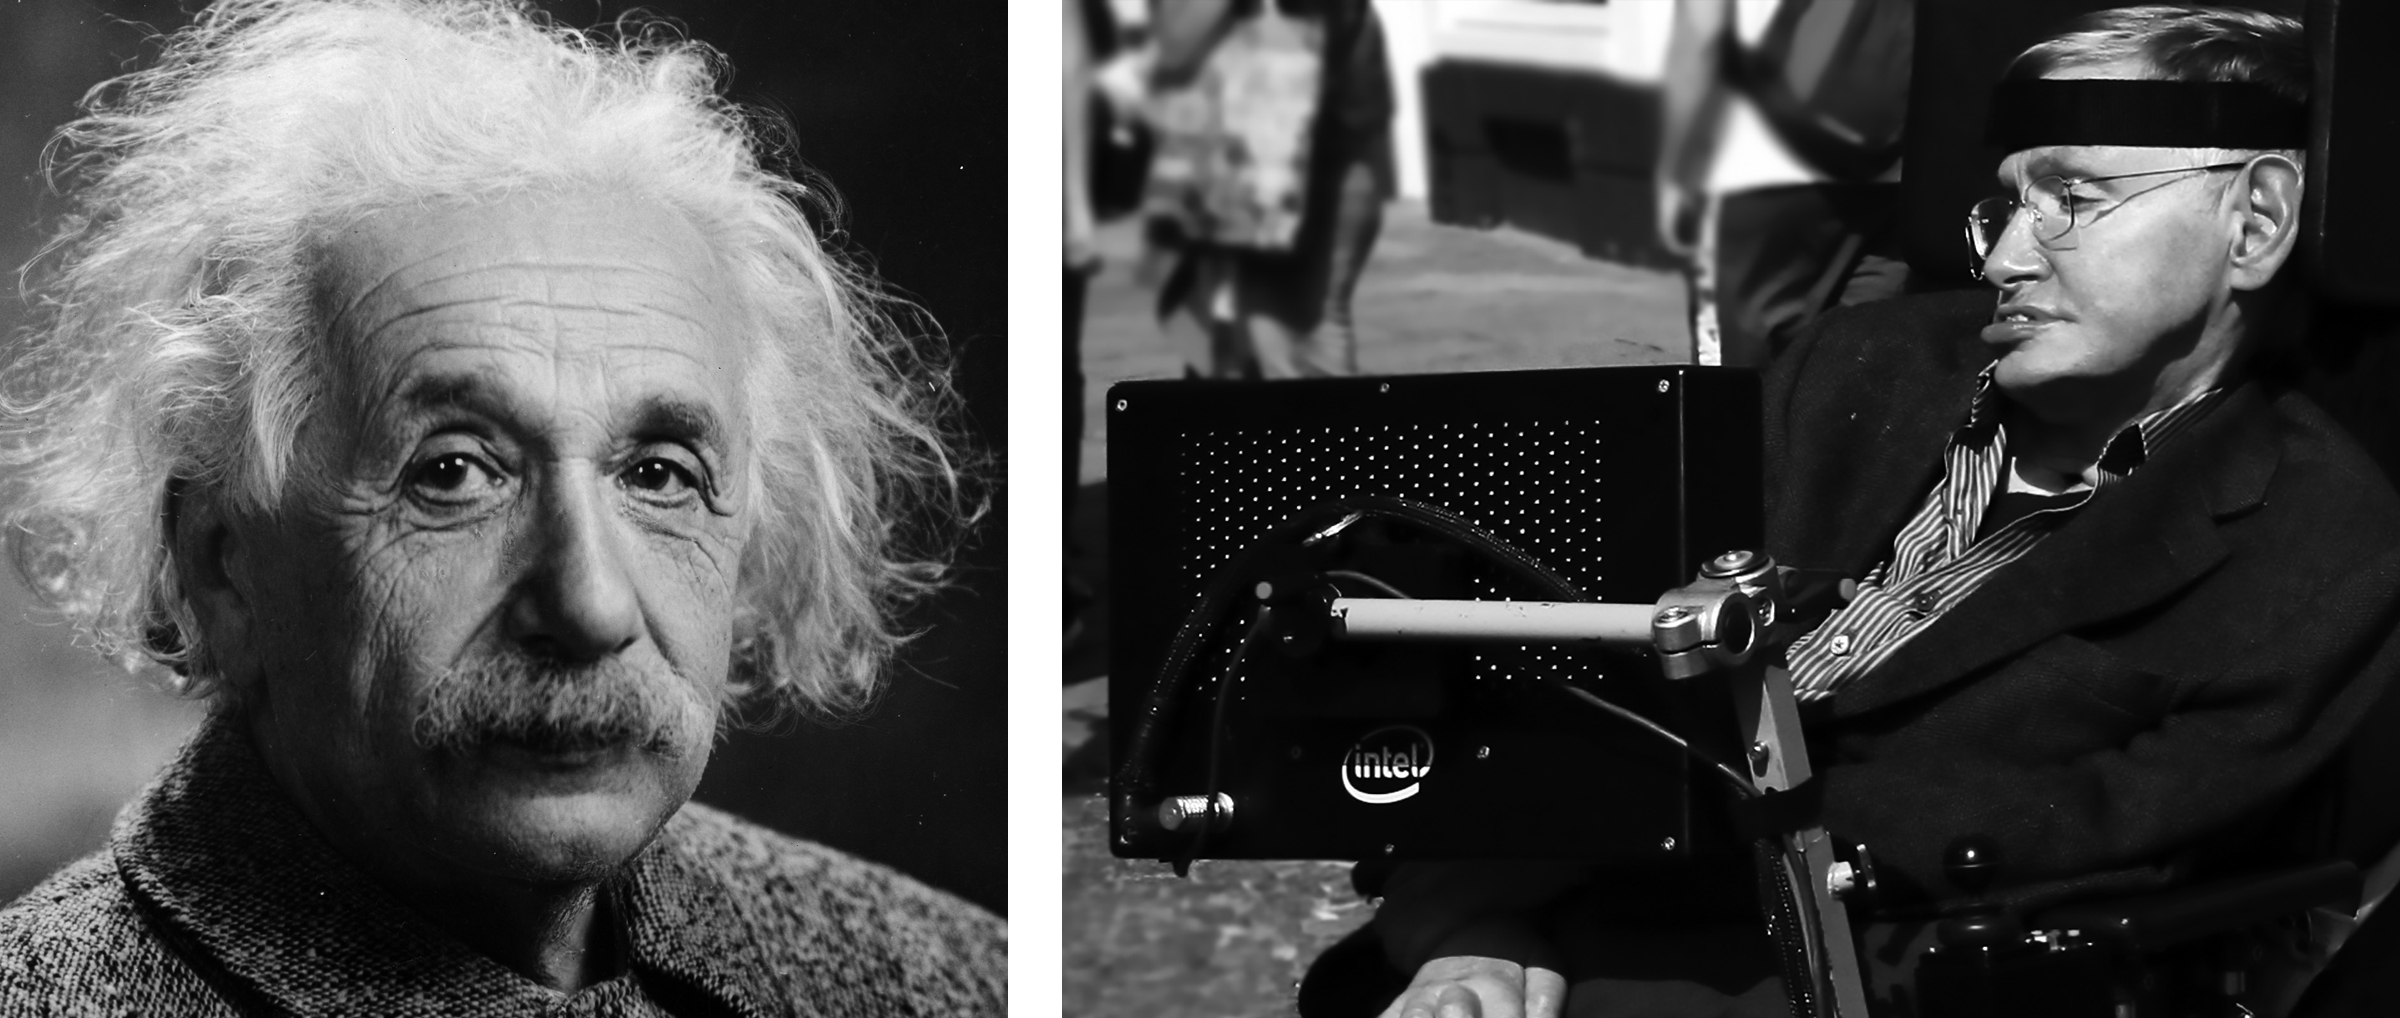 From left to right: headshot of Albert Einstein; photo of Stephen Hawking sitting in his motorized wheelchair while outside.